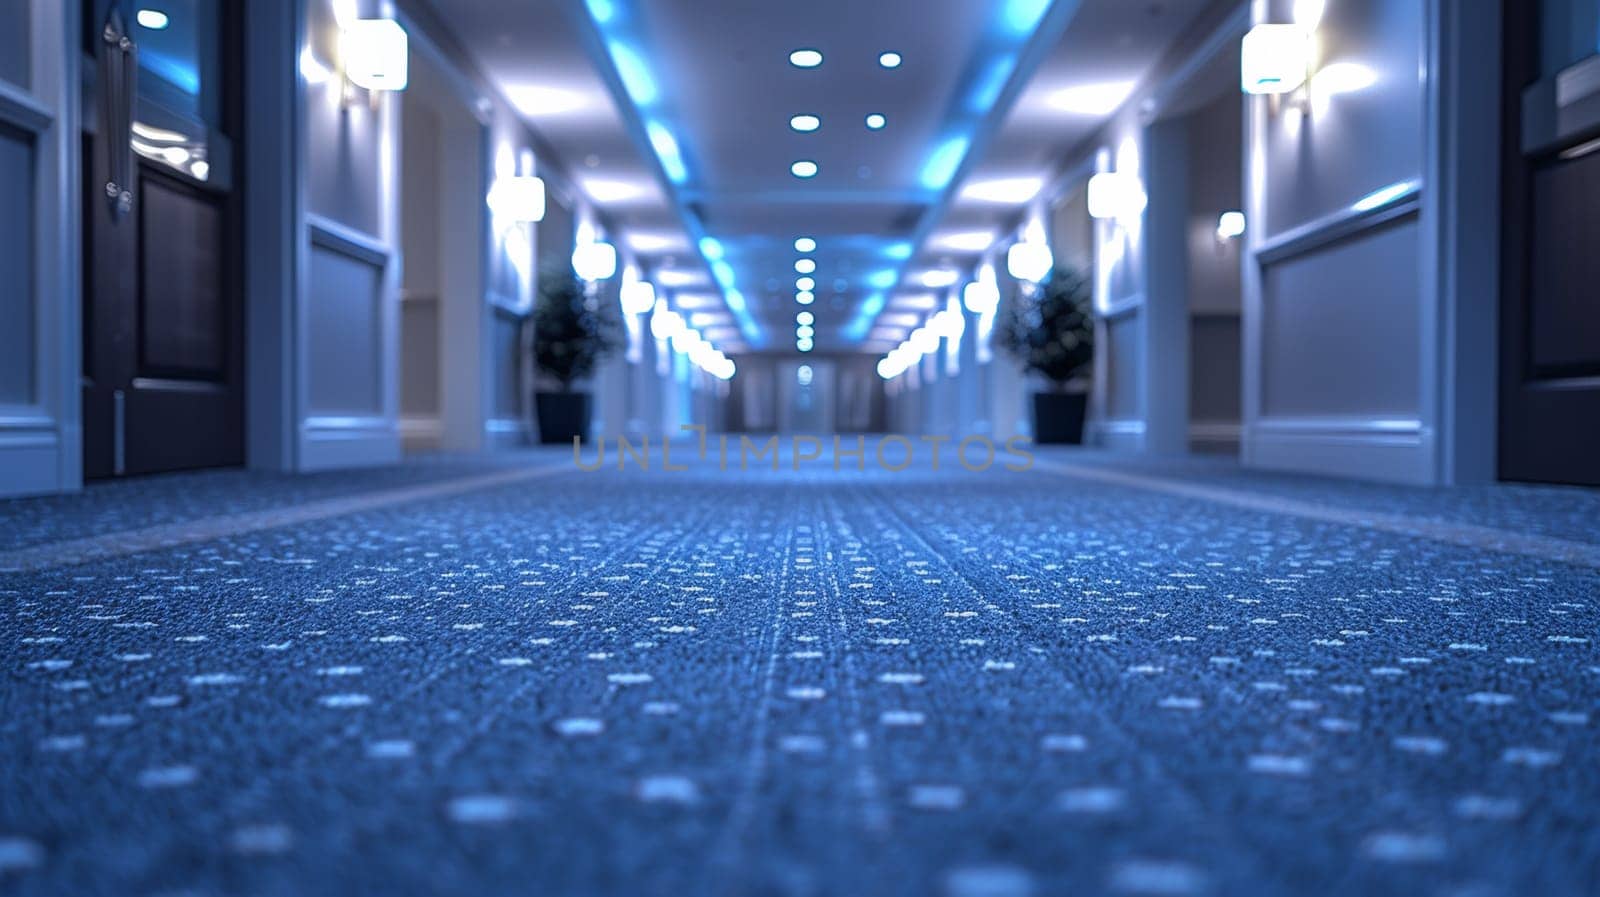 A hallway with blue carpet and lights on the ceiling